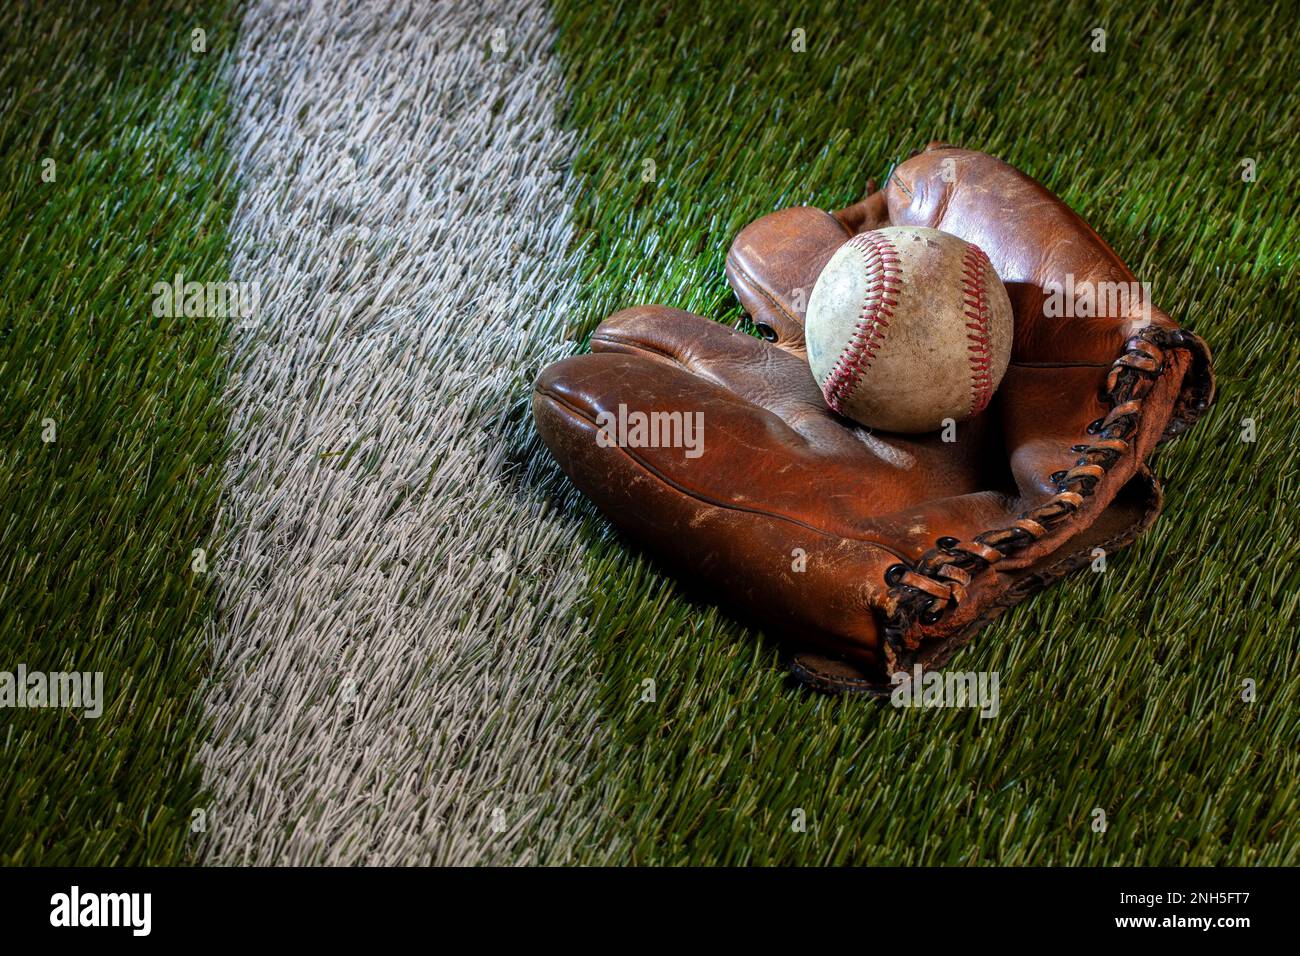 Old baseball in brown leather mitt on a grass field with white stripe Stock Photo